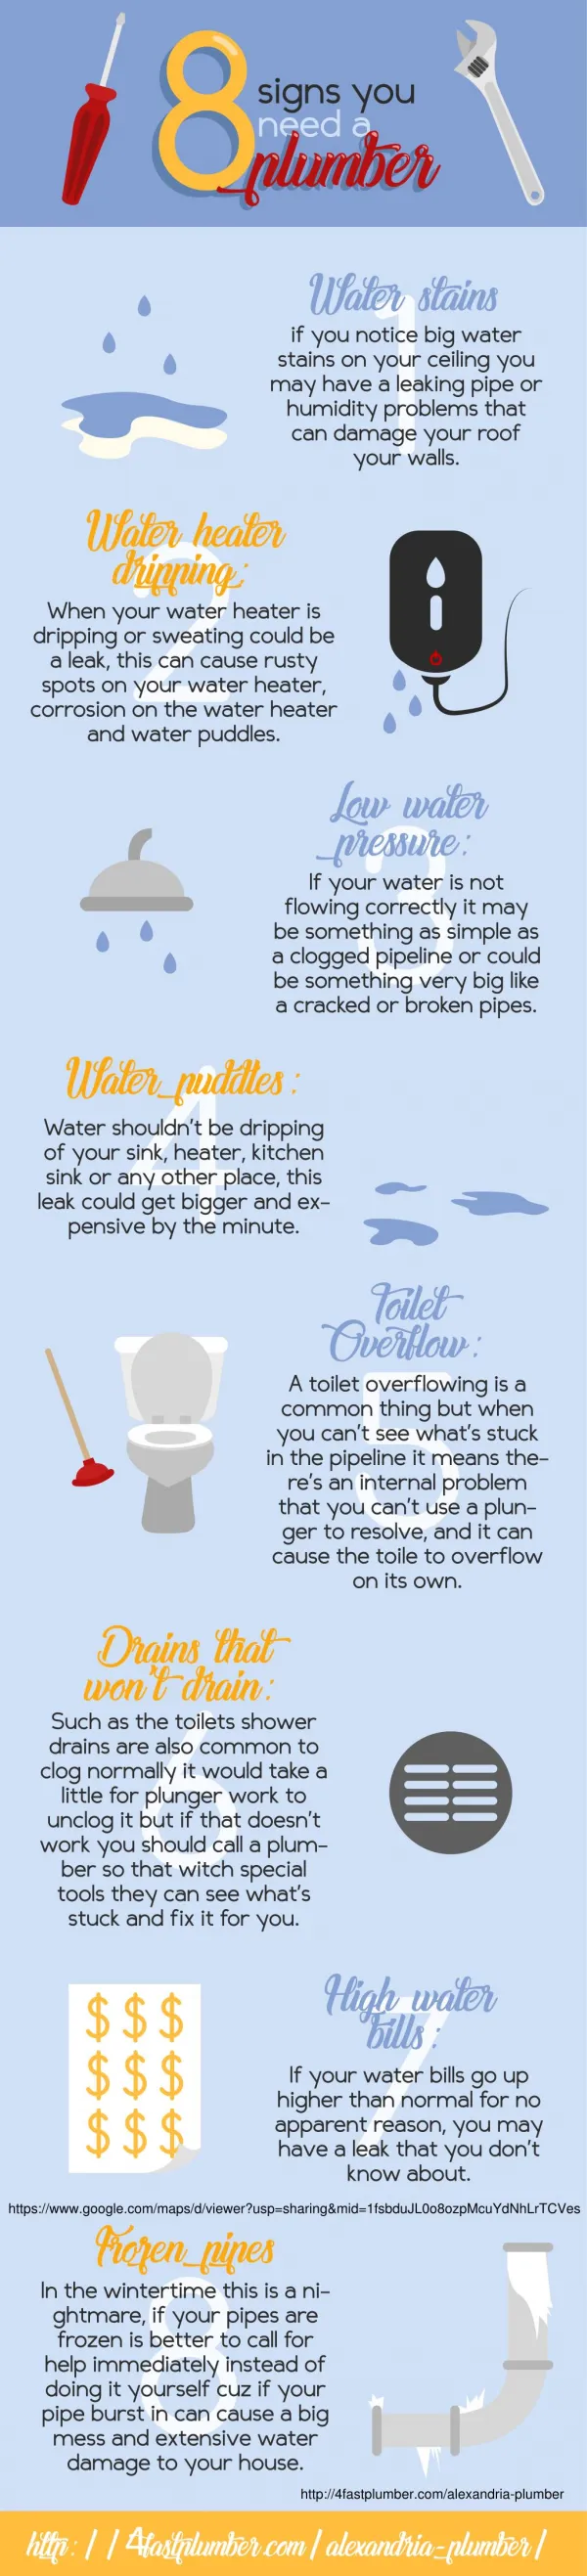 8 Signs You Need A Plumber